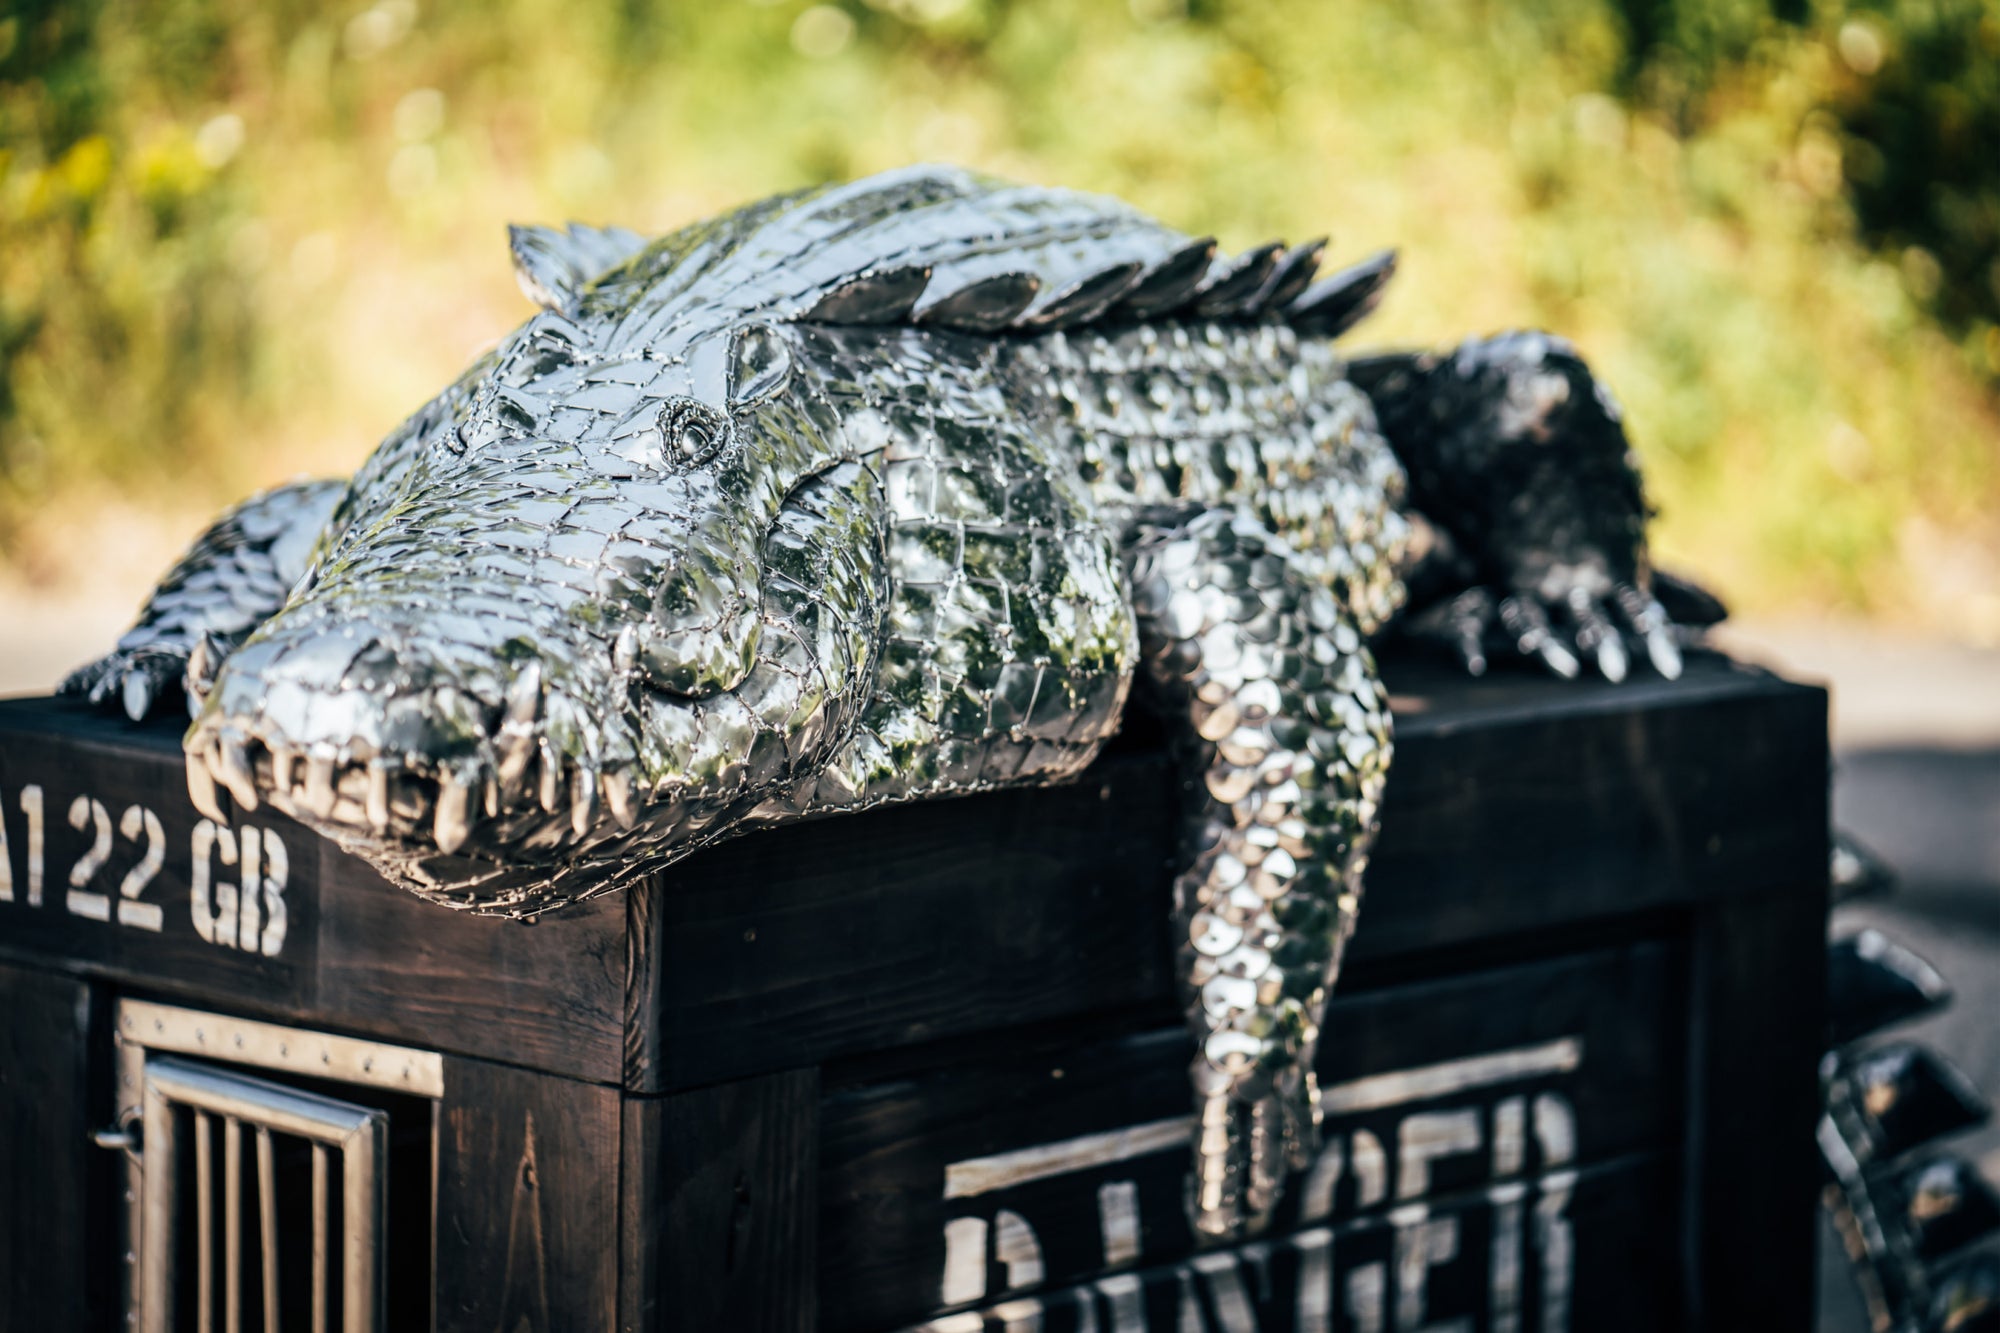 Stainless_steel_crocodile_sculpture_on_a_box_Michael_Turner